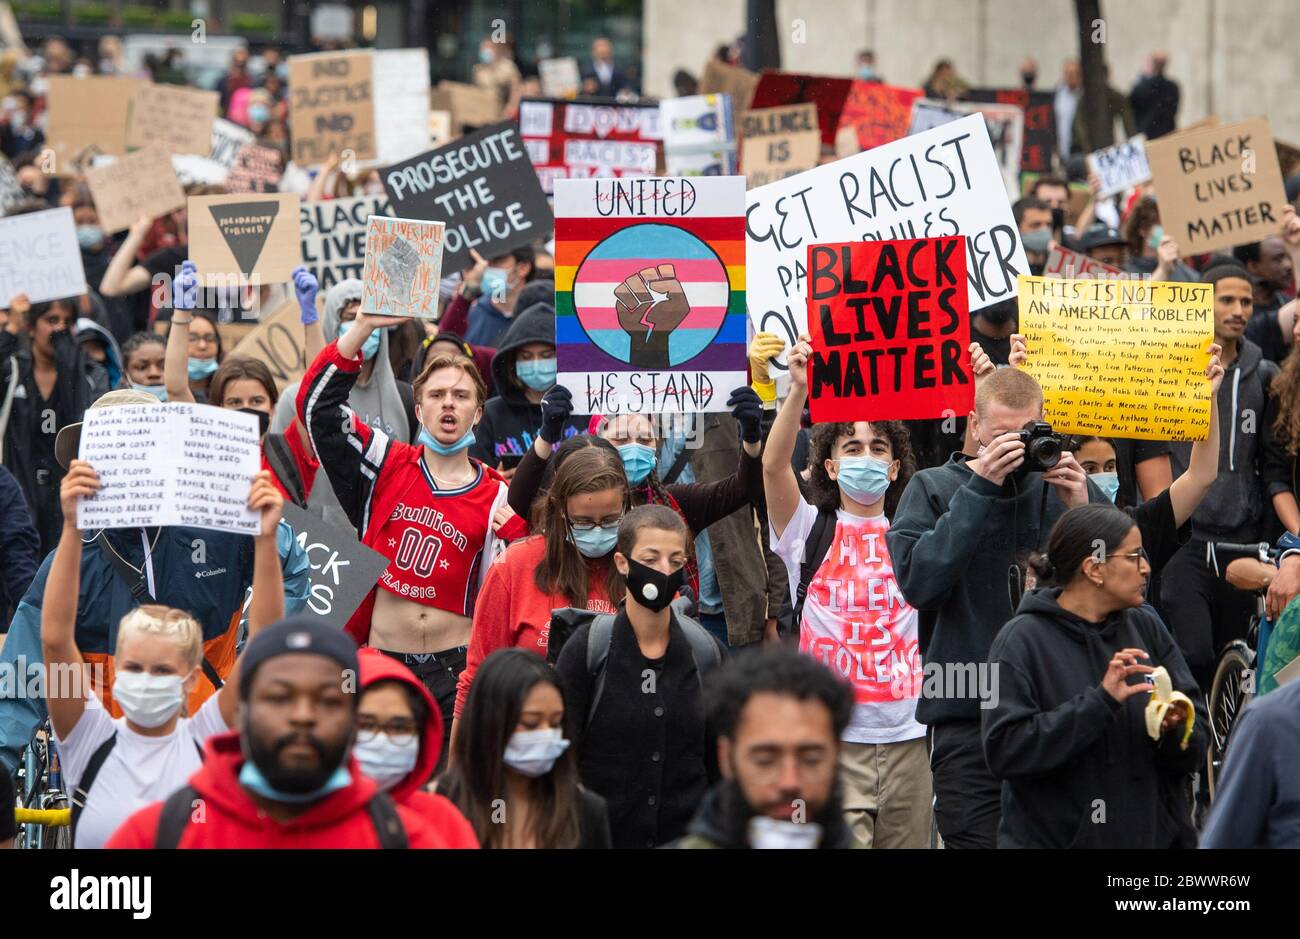 People participate in a Black Lives Matter demonstration on Park Lane, London, in memory of George Floyd who was killed on May 25 while in police custody in the US city of Minneapolis. Stock Photo